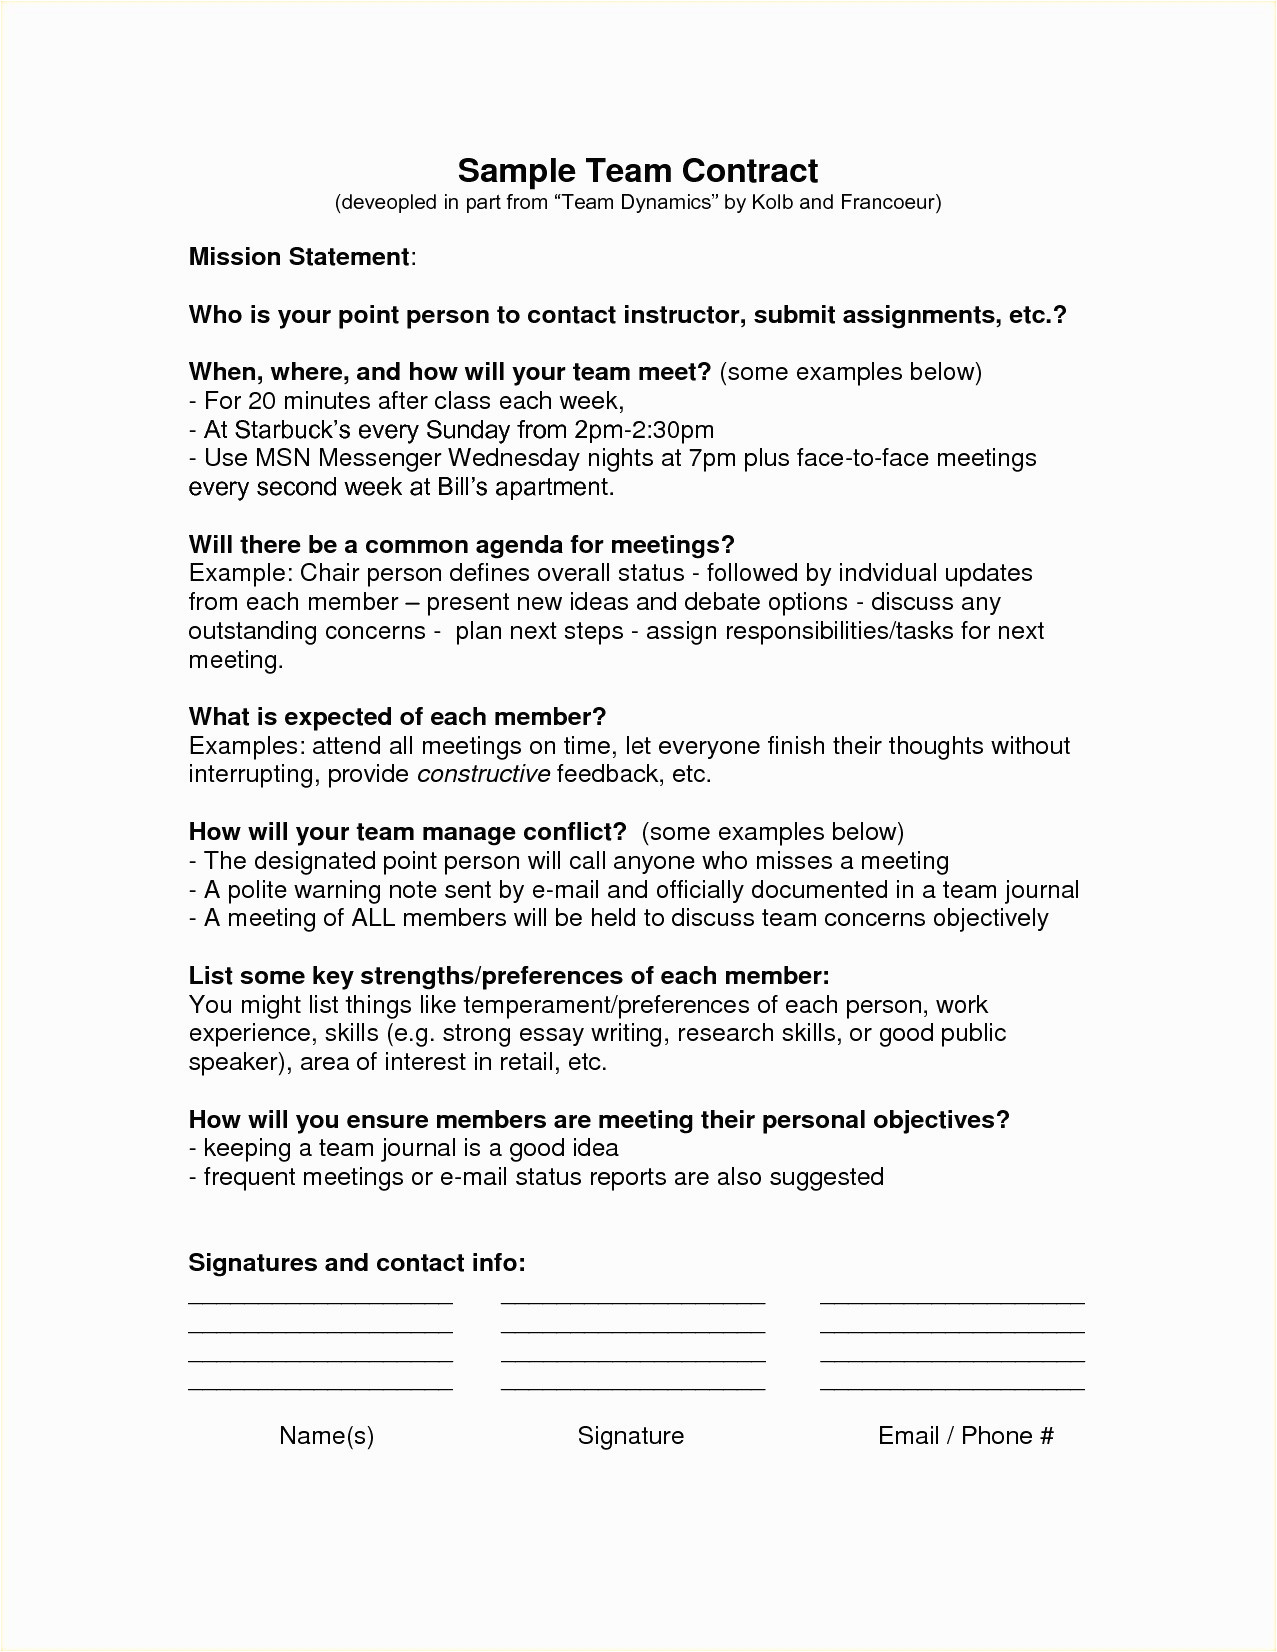 newborn photography contract template